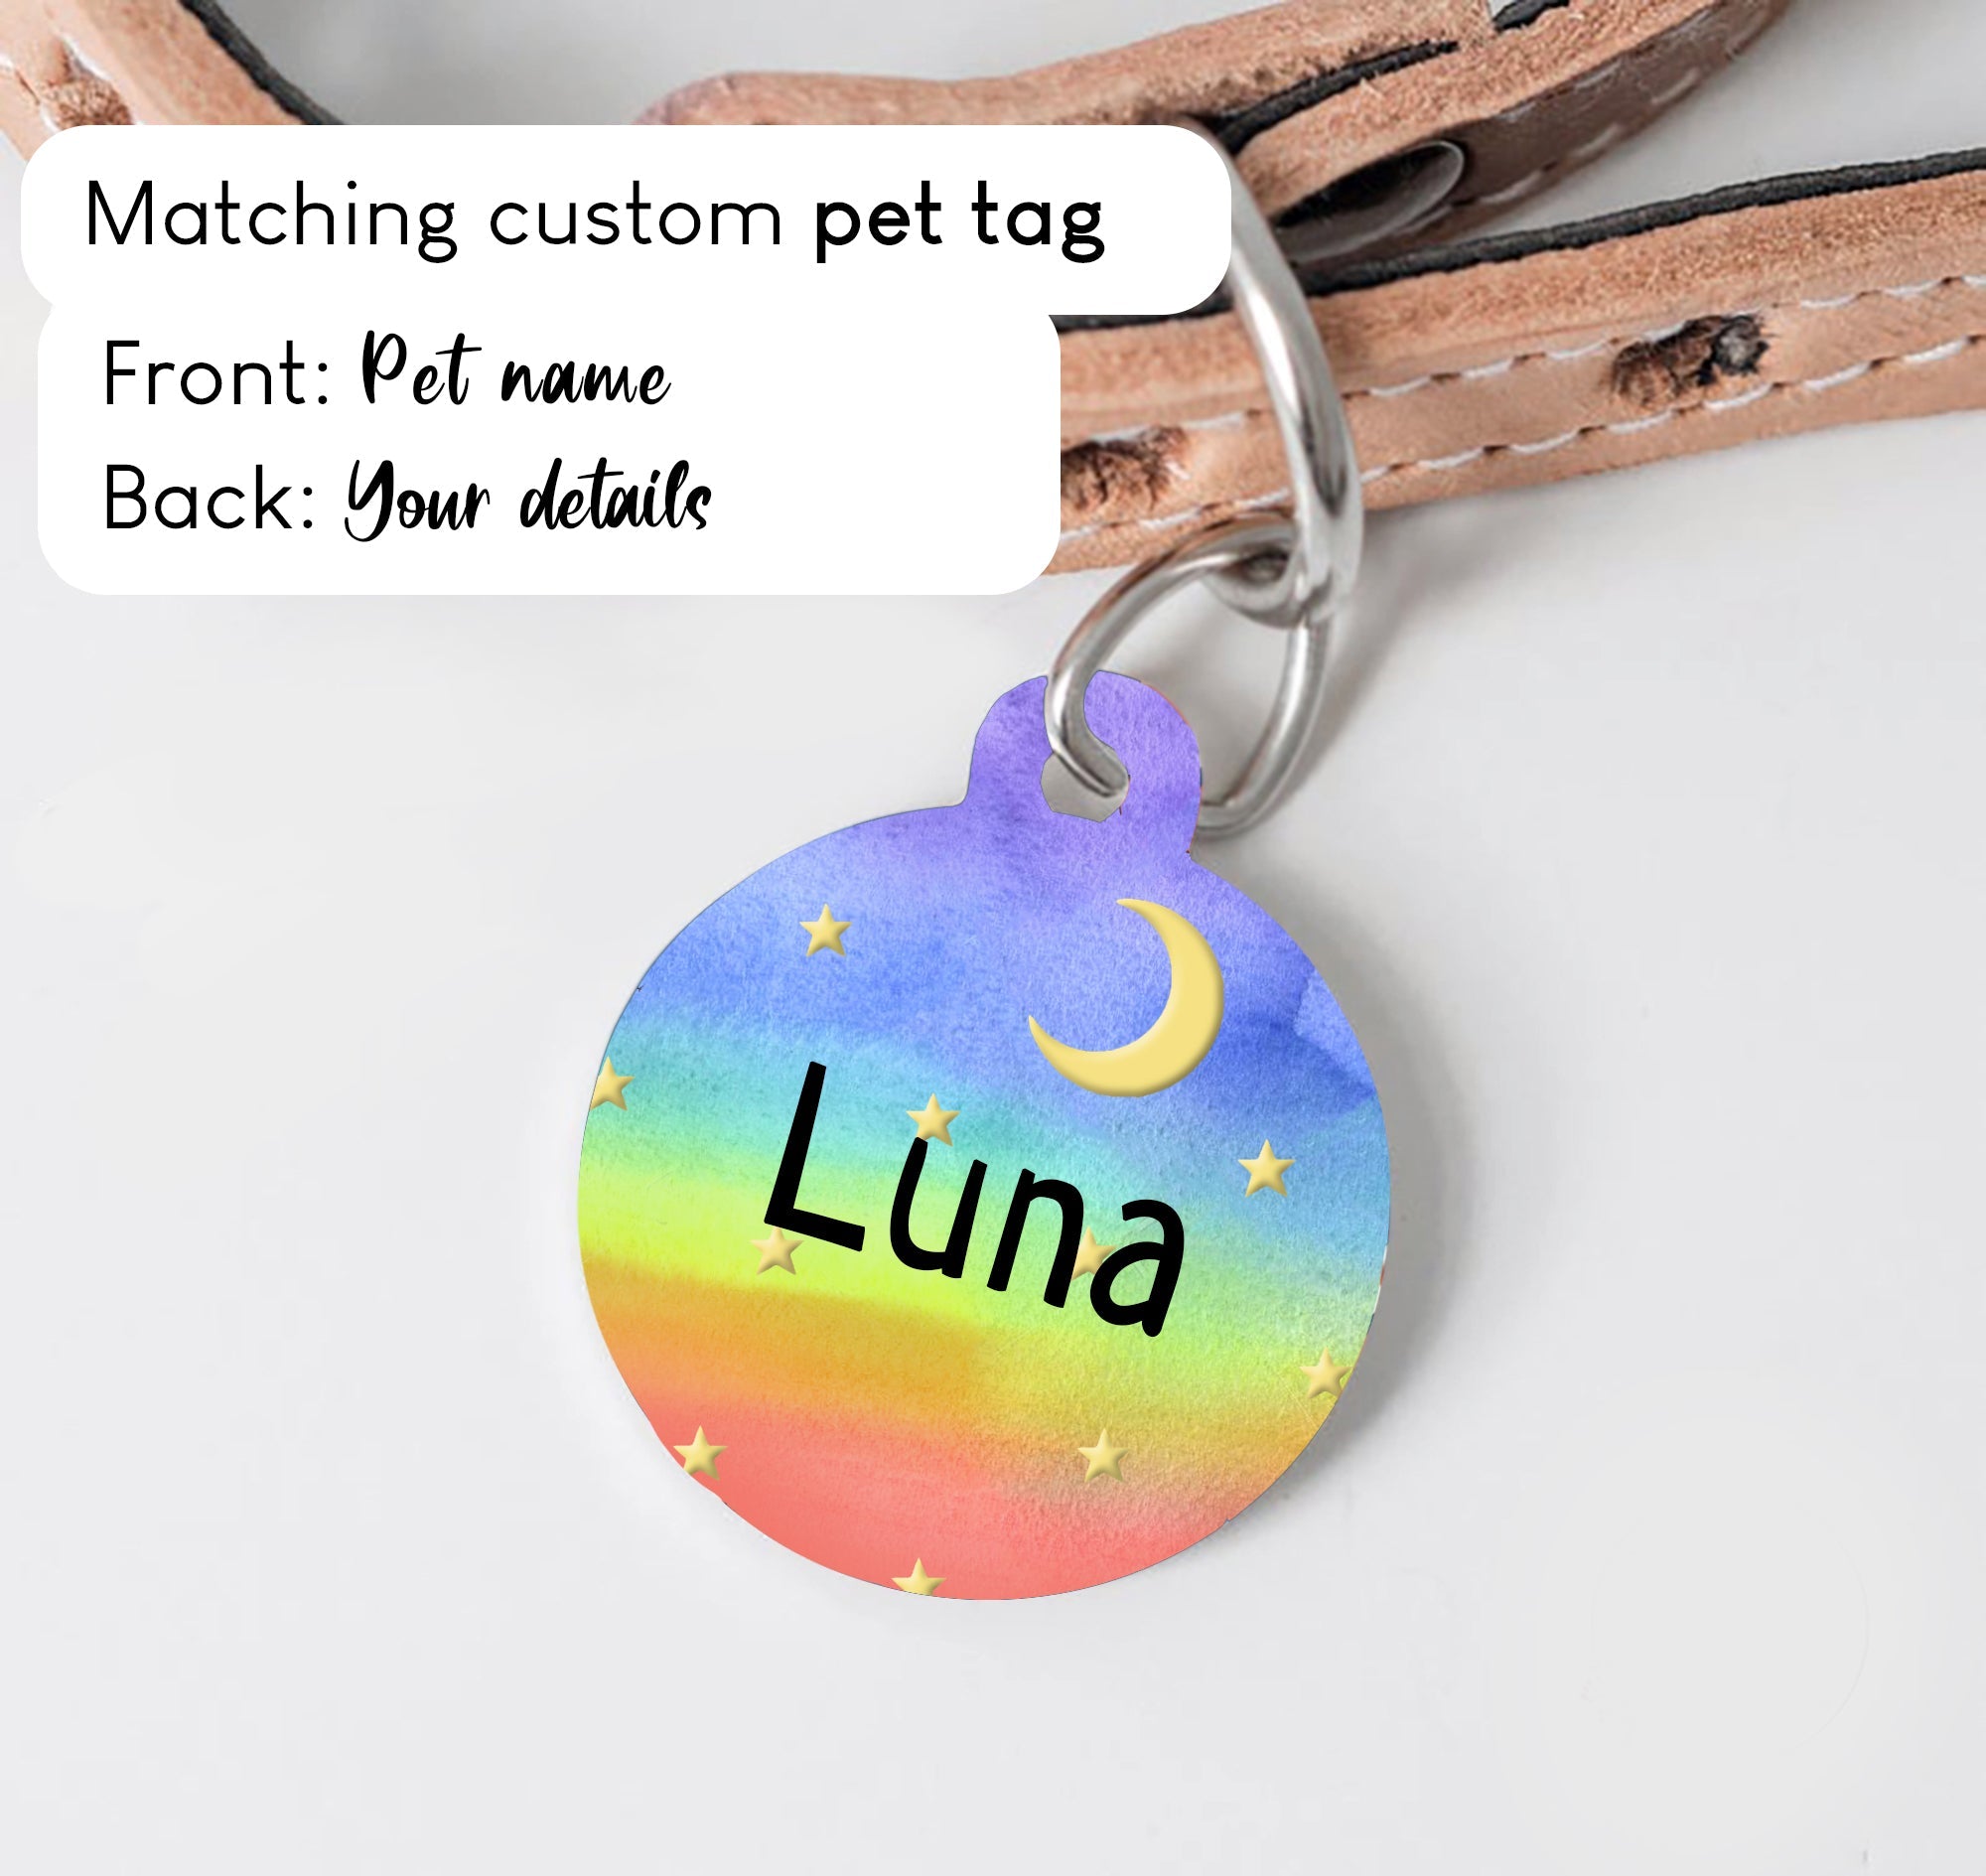 Rainbow with Golden Moon Stars Dog Collar - S-L sizes with custom matching pet tag - Adventures of Rubi